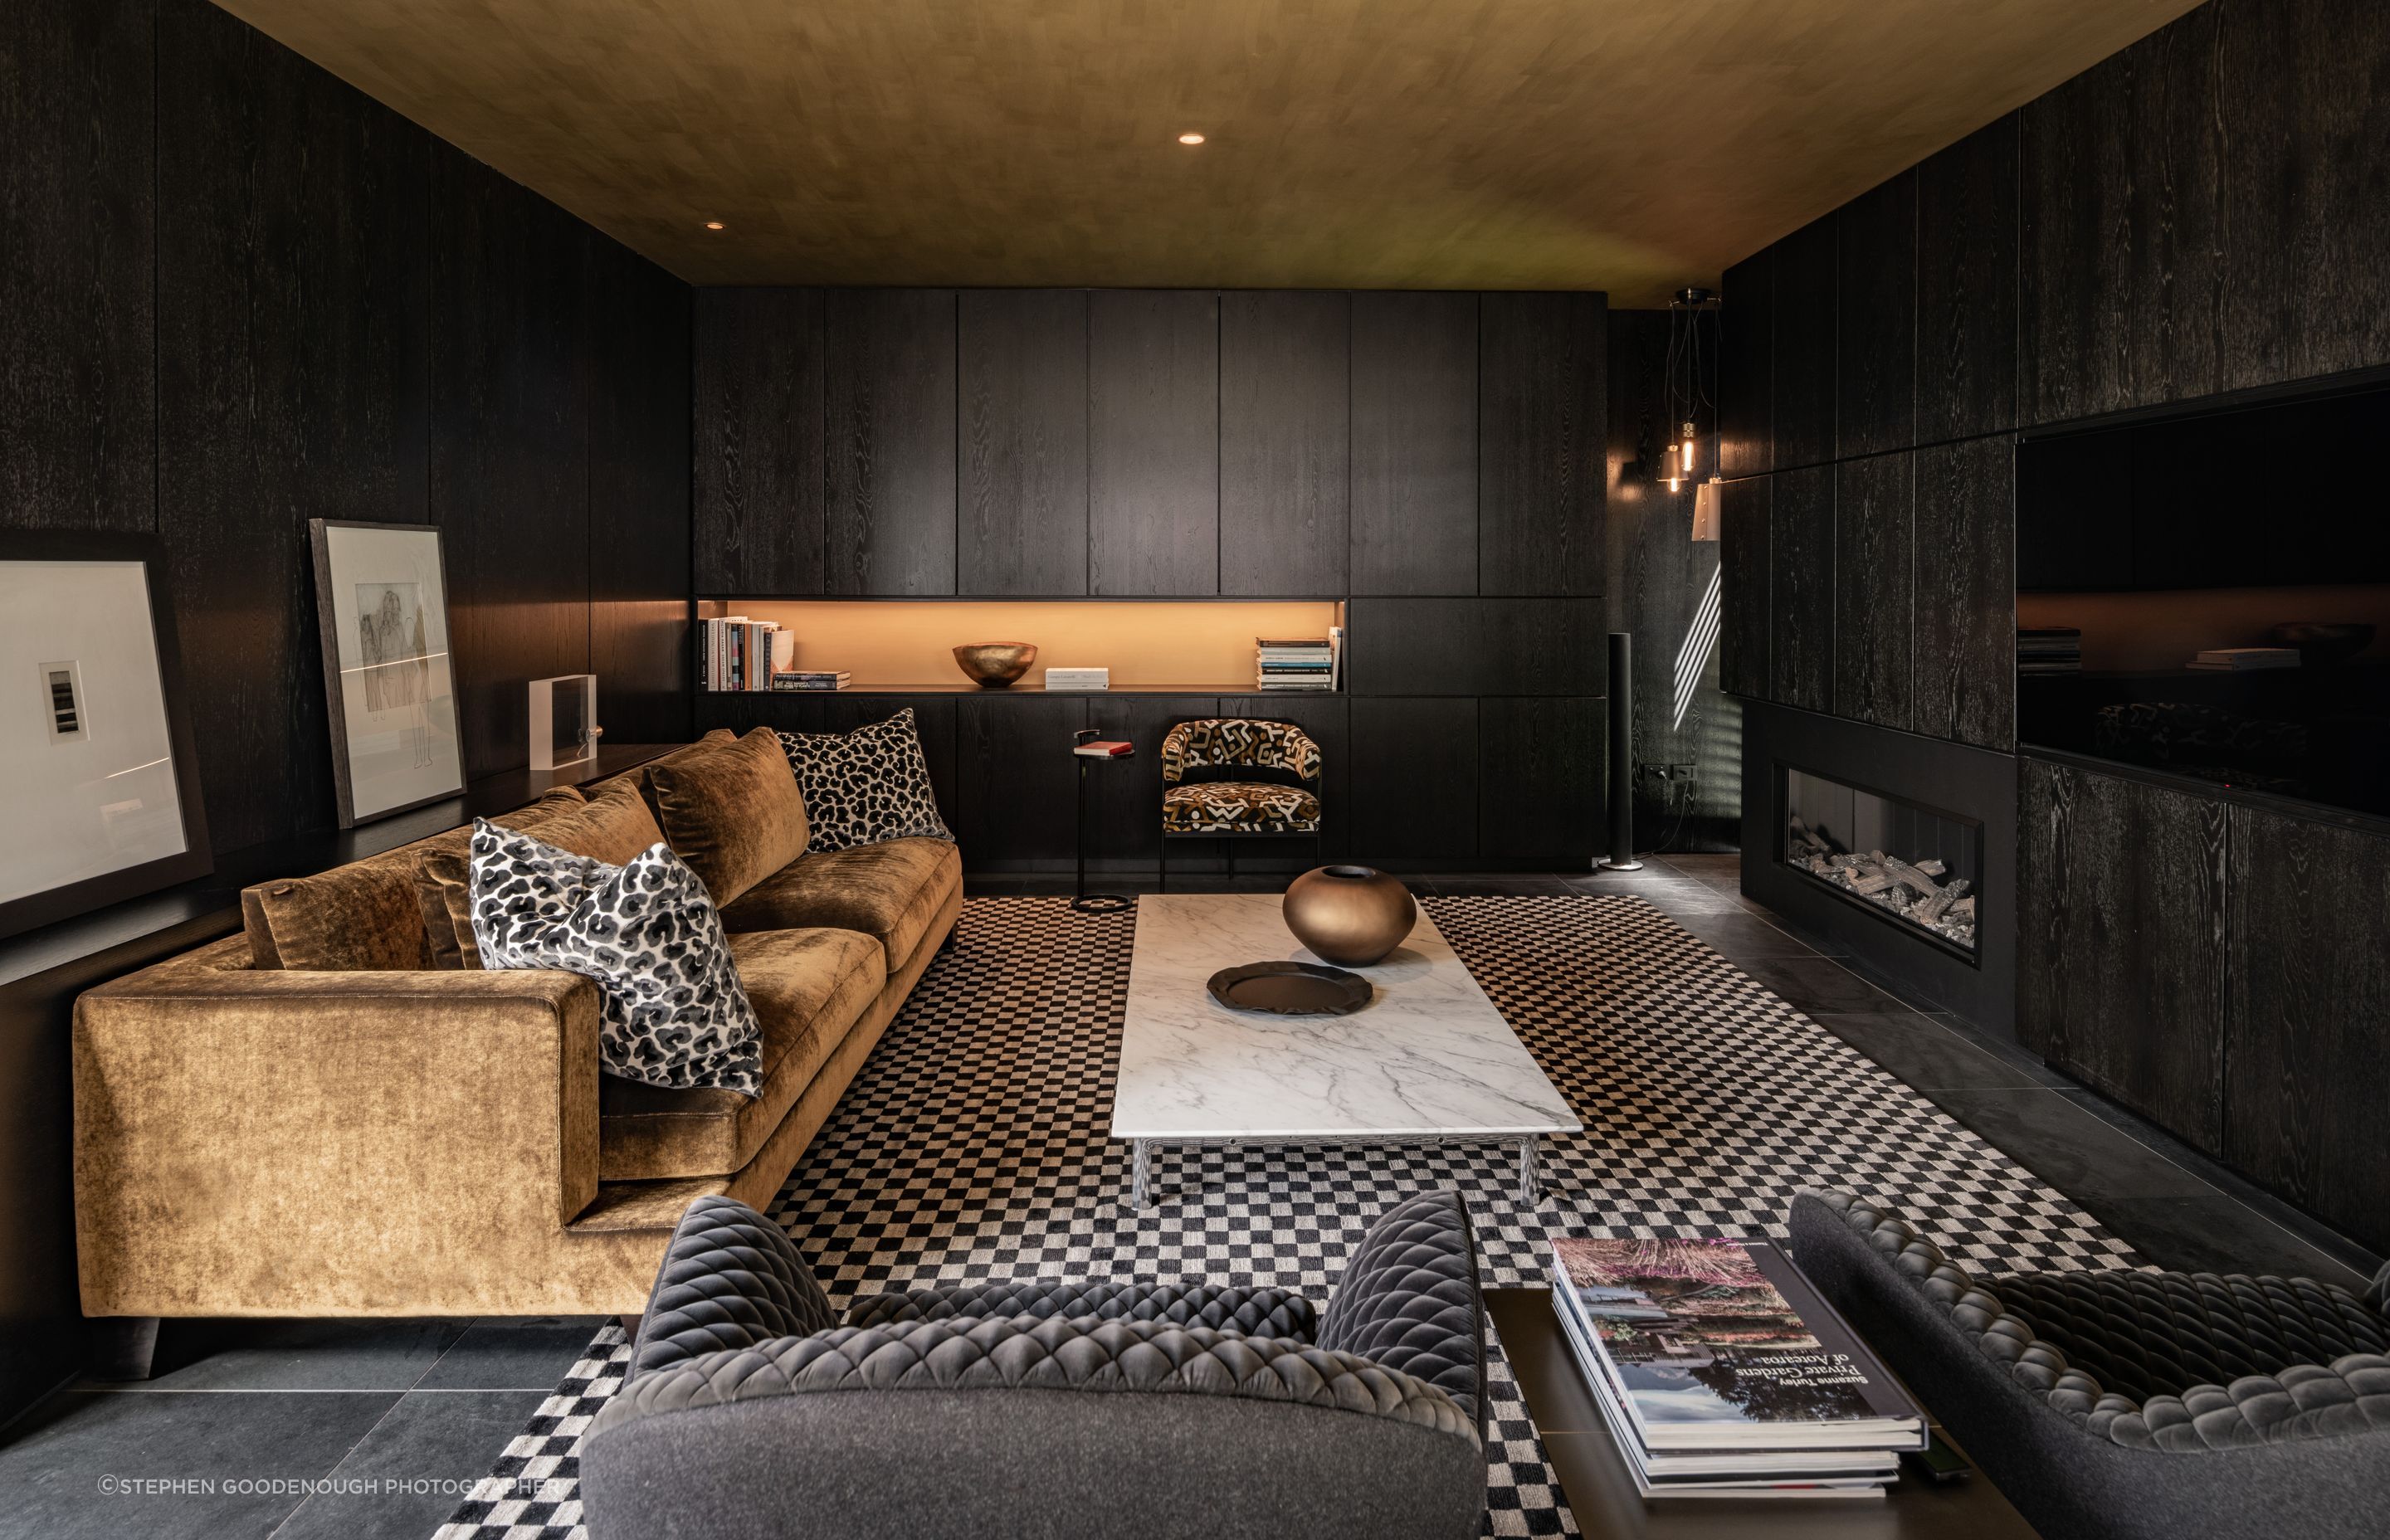 A separate lounge offers the unexpected in the form of dark tones, textures and patterns.